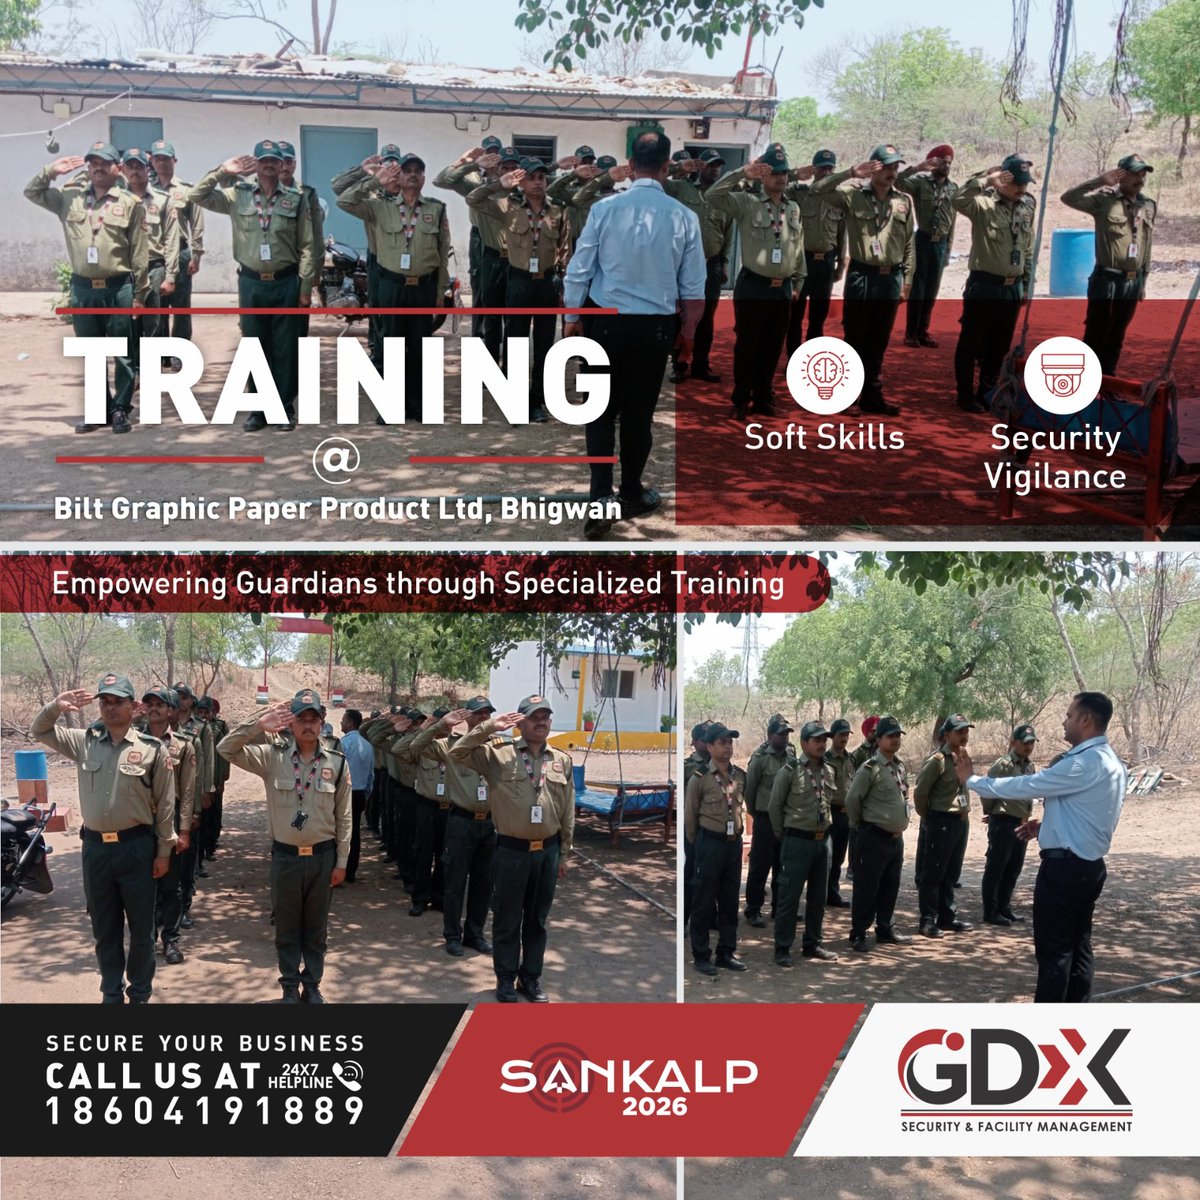 Our security team, dedicated to excellence and safety, stands prepared to serve and safeguard, fortified by advanced training.

Call us anytime at our 24x7 helpline: 18604191889 #FacilityManagement #SecurityManagement #SecuritySolutions #FacilityServices #Sankalp2026 #GDXGroup